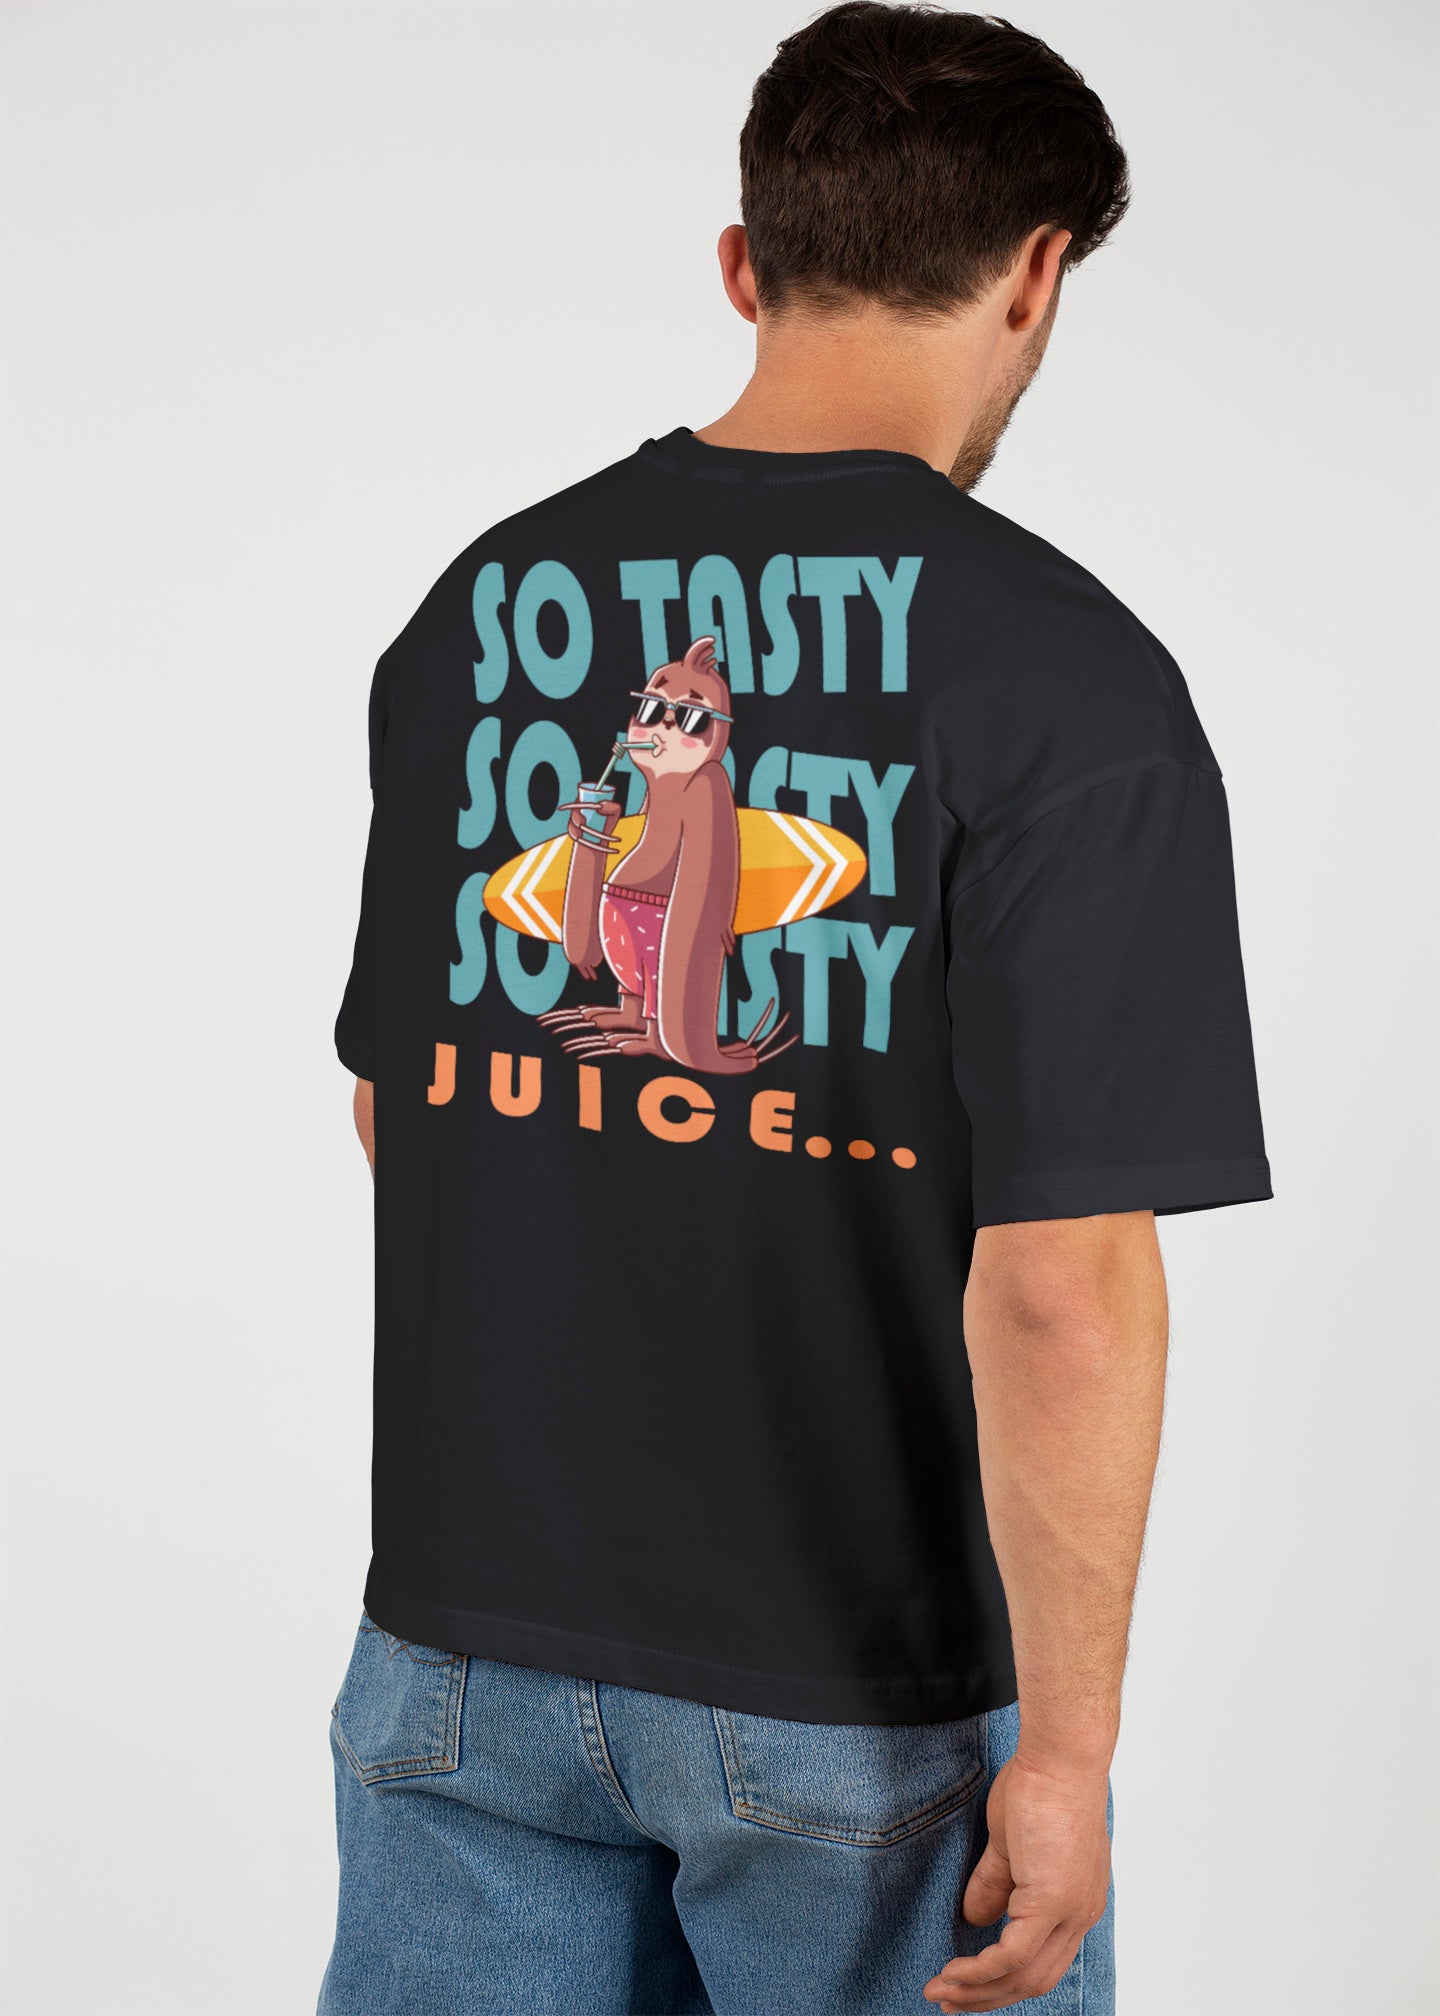 So testy Juice Graphic Printed Oversized T-shirt